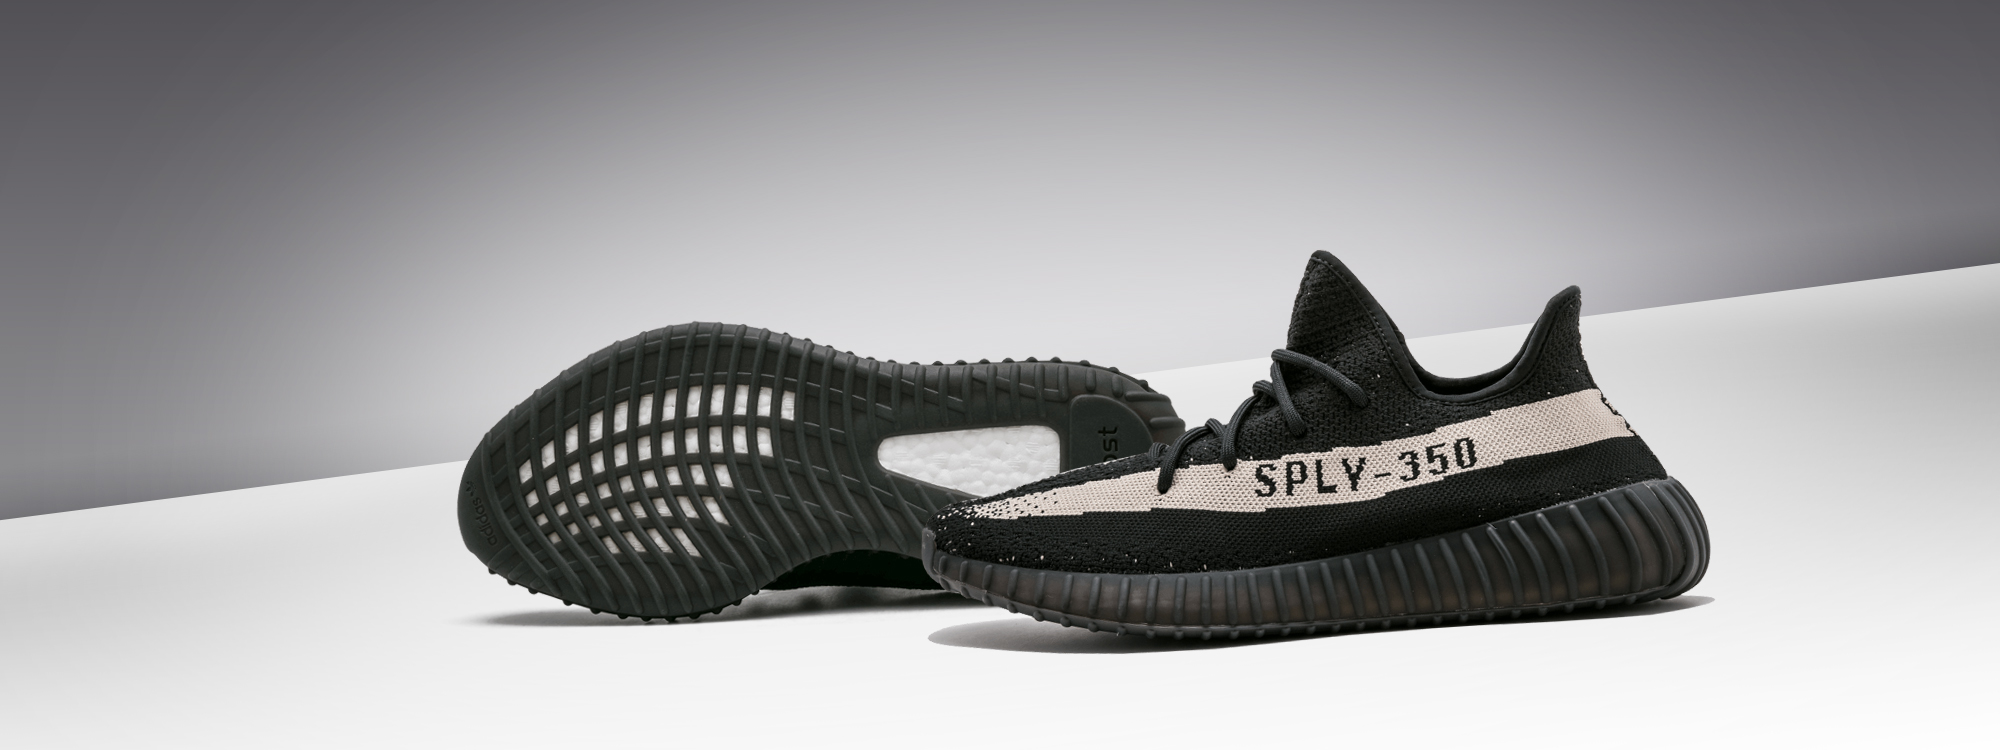 buy real  Yeezy Boost 350 V2 Black White / Oreo for 195 USD only